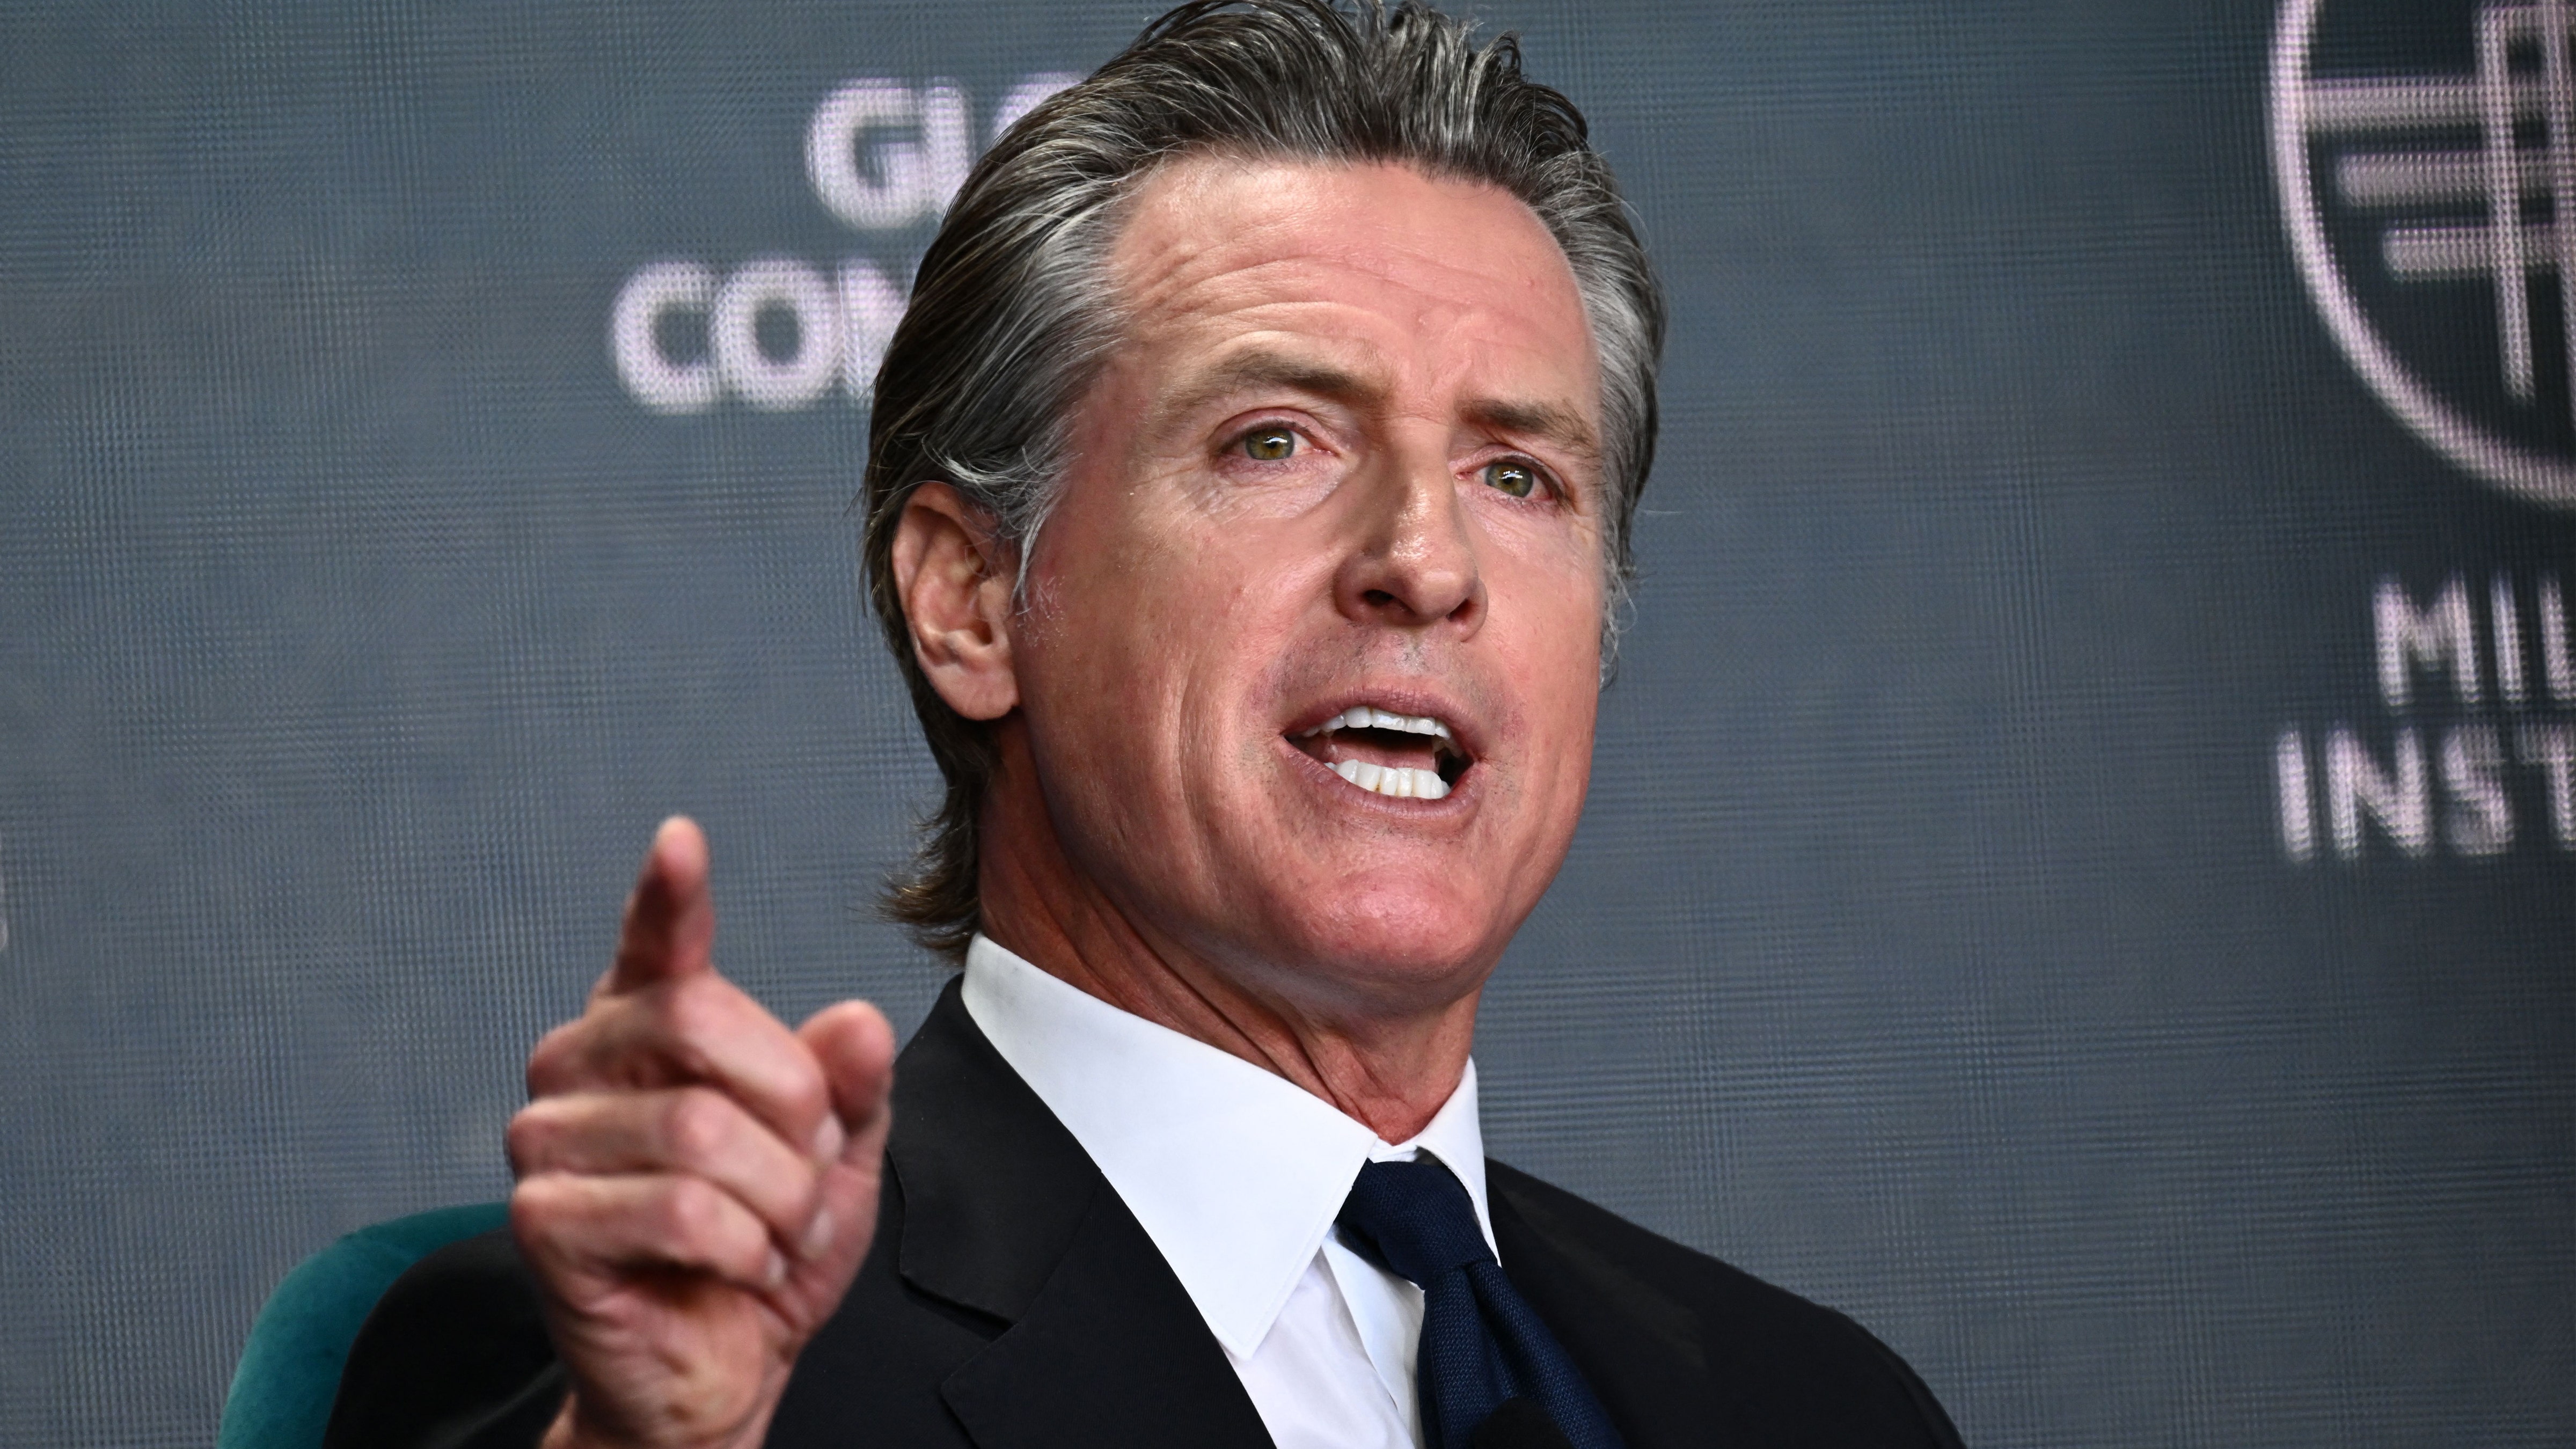 Gavin Newsom signs California law doubling taxes on guns and ammo: ‘A small price to pay’